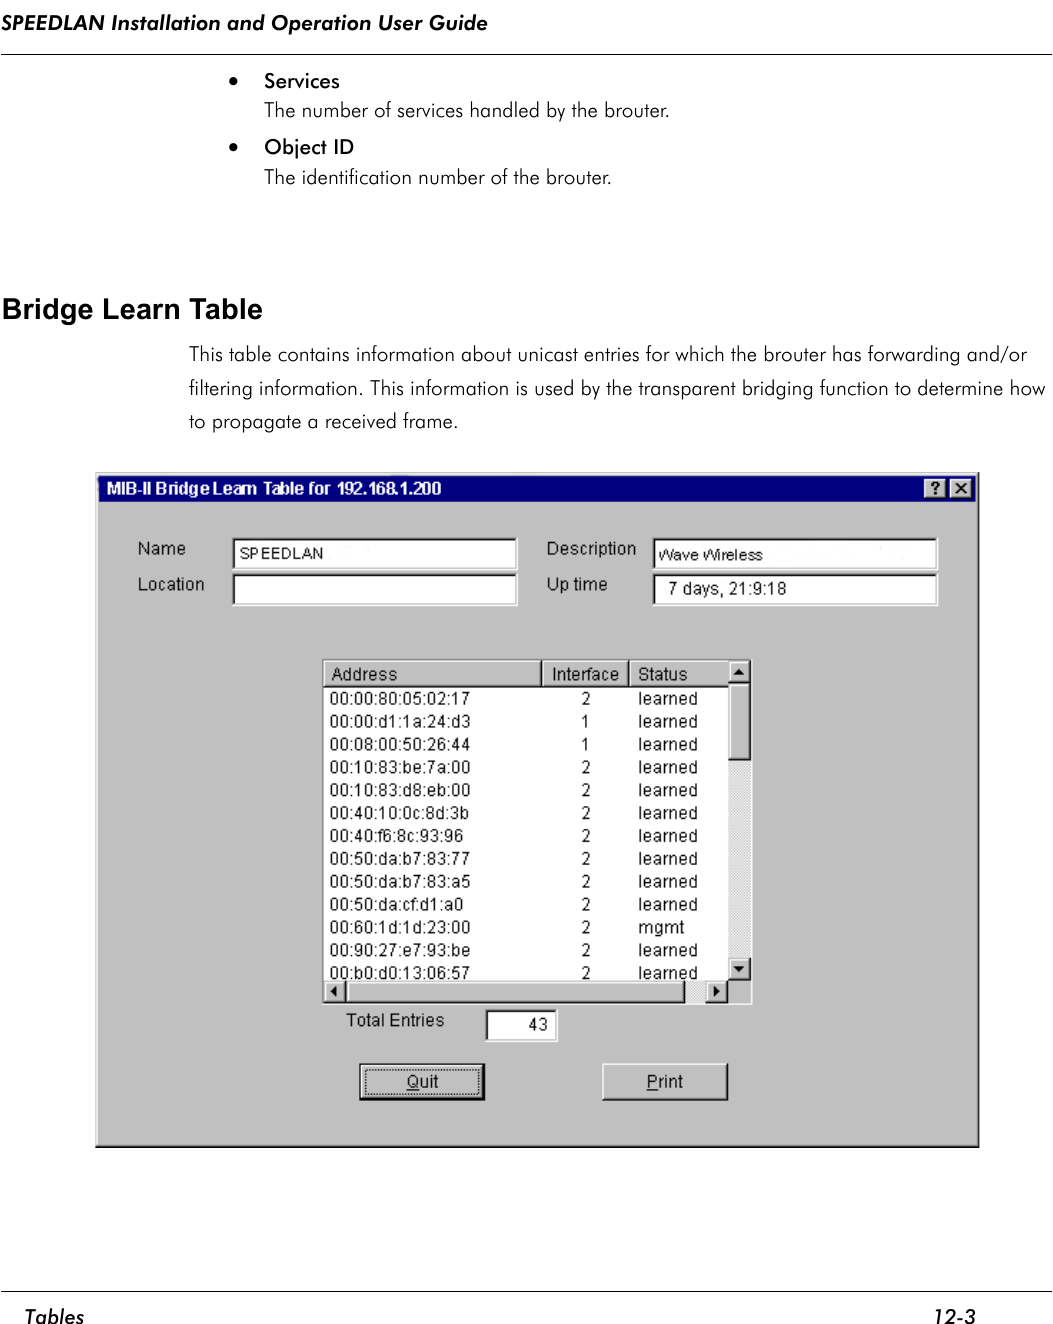 SPEEDLAN Installation and Operation User Guide     Tables 12-3                                                                                                                                                              •ServicesThe number of services handled by the brouter. •Object IDThe identification number of the brouter.     Bridge Learn Table This table contains information about unicast entries for which the brouter has forwarding and/or filtering information. This information is used by the transparent bridging function to determine how to propagate a received frame. 